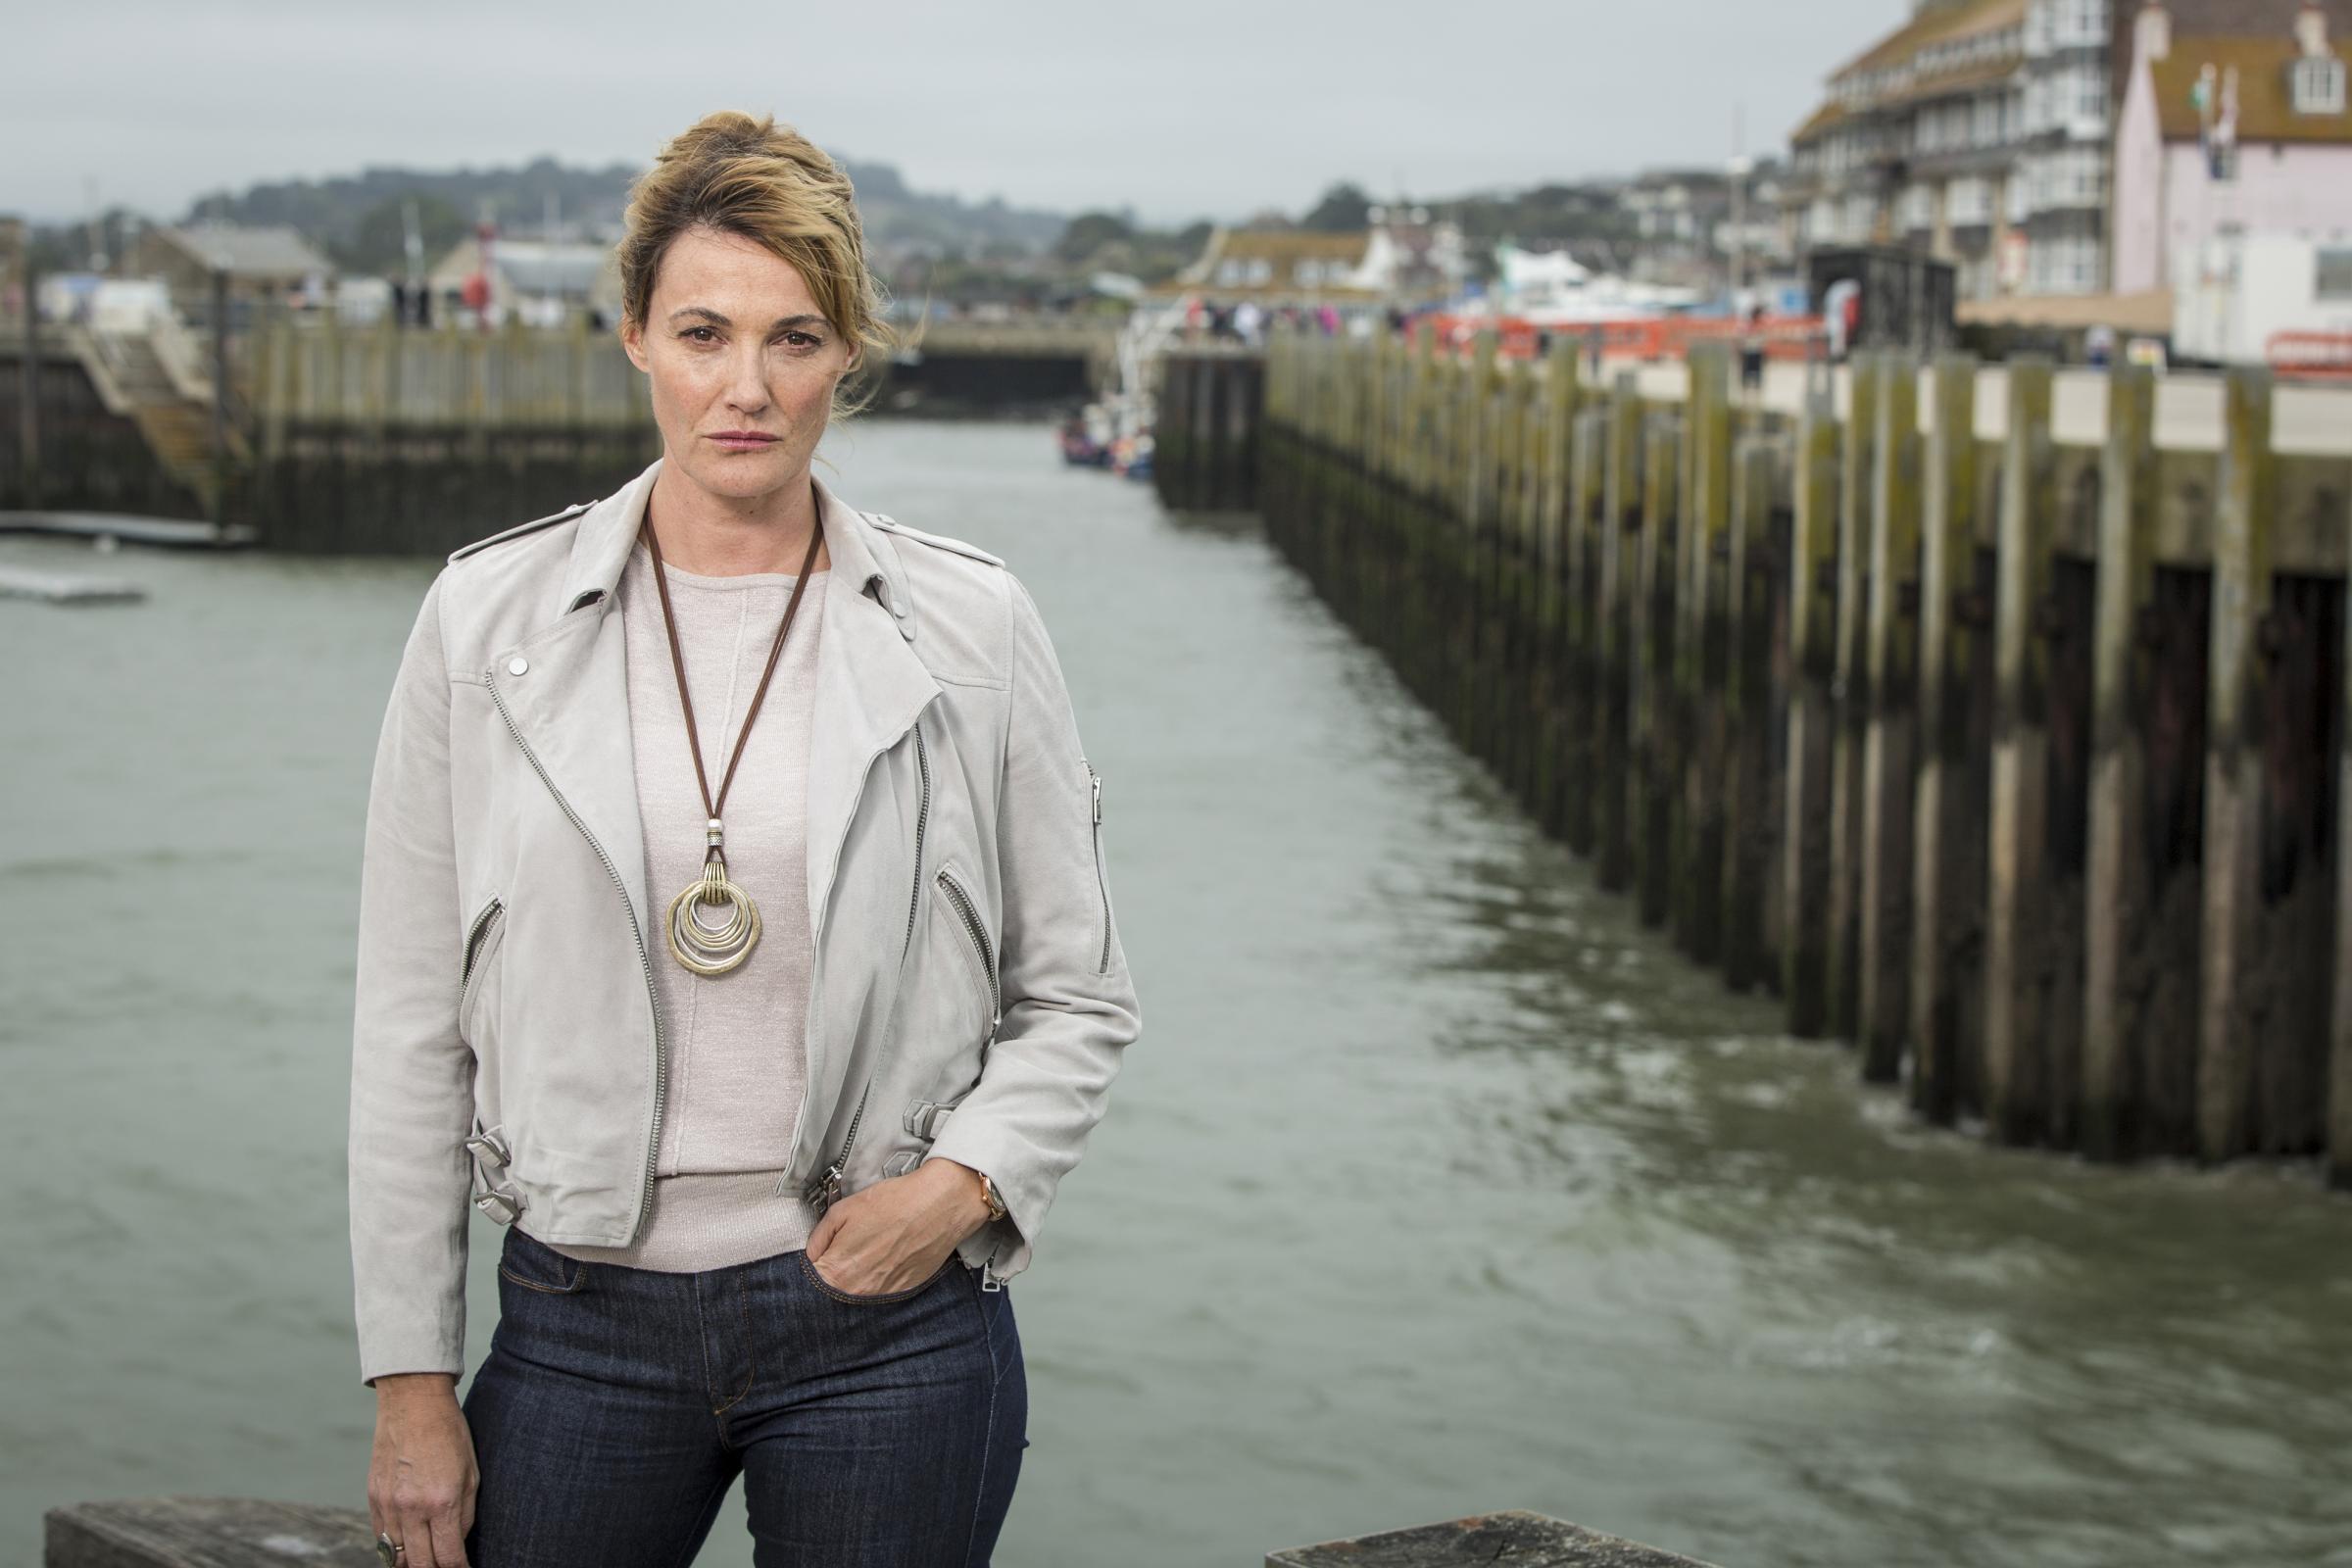 Town at the centre of police drama — for TV